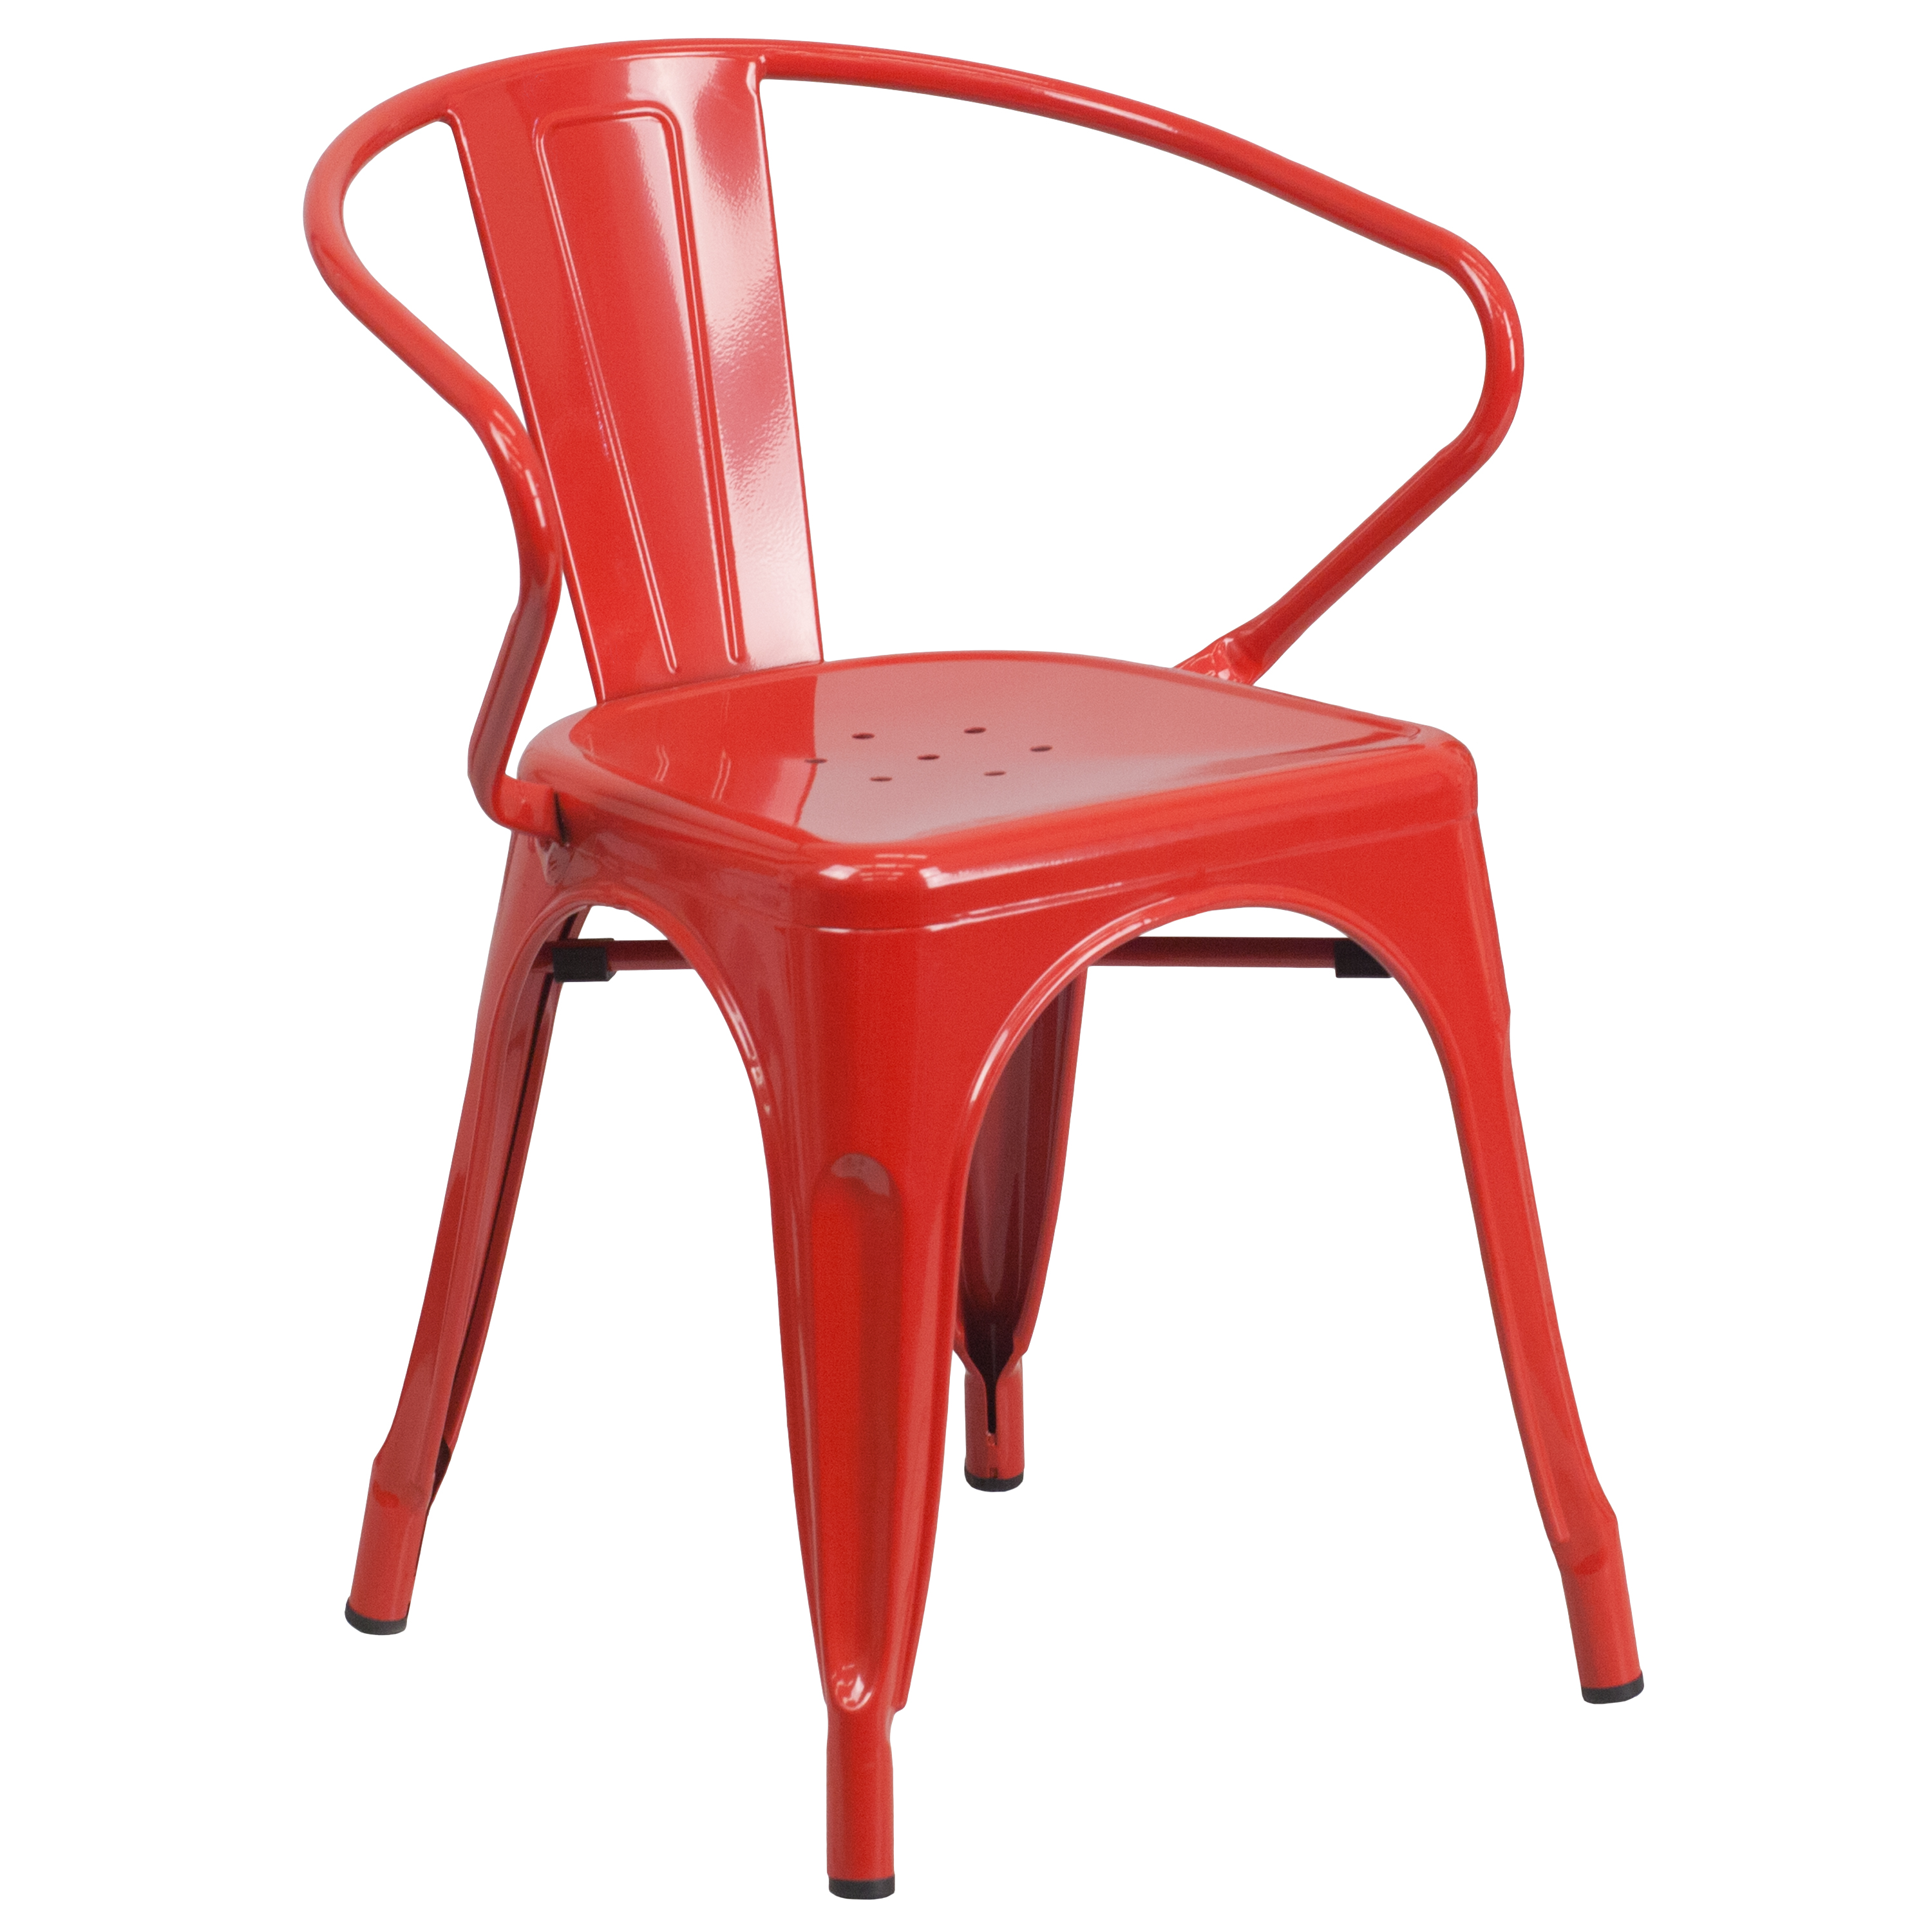 Flash Furniture Grady Commercial Grade 31.5" Square Red Metal Indoor-Outdoor Table Set with 4 Arm Chairs - image 5 of 5